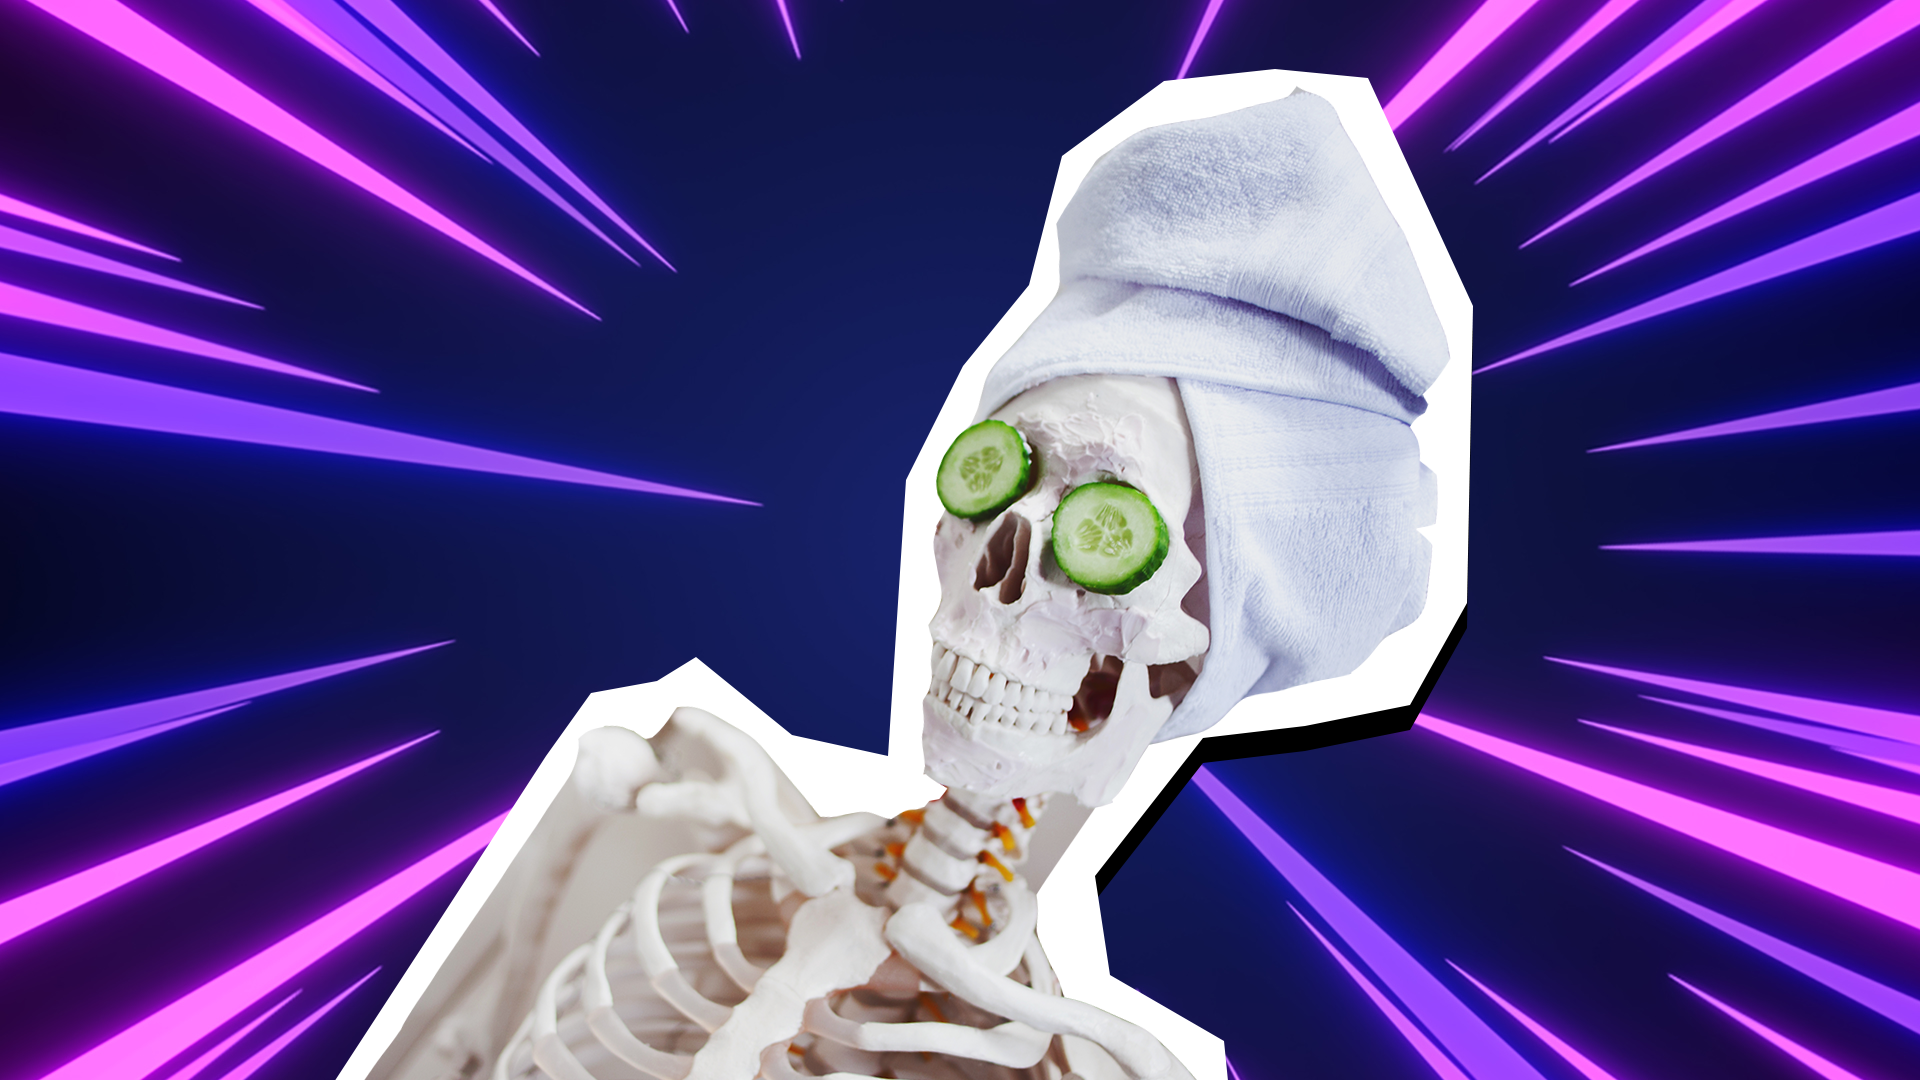 Skeleton relaxing with towel on head